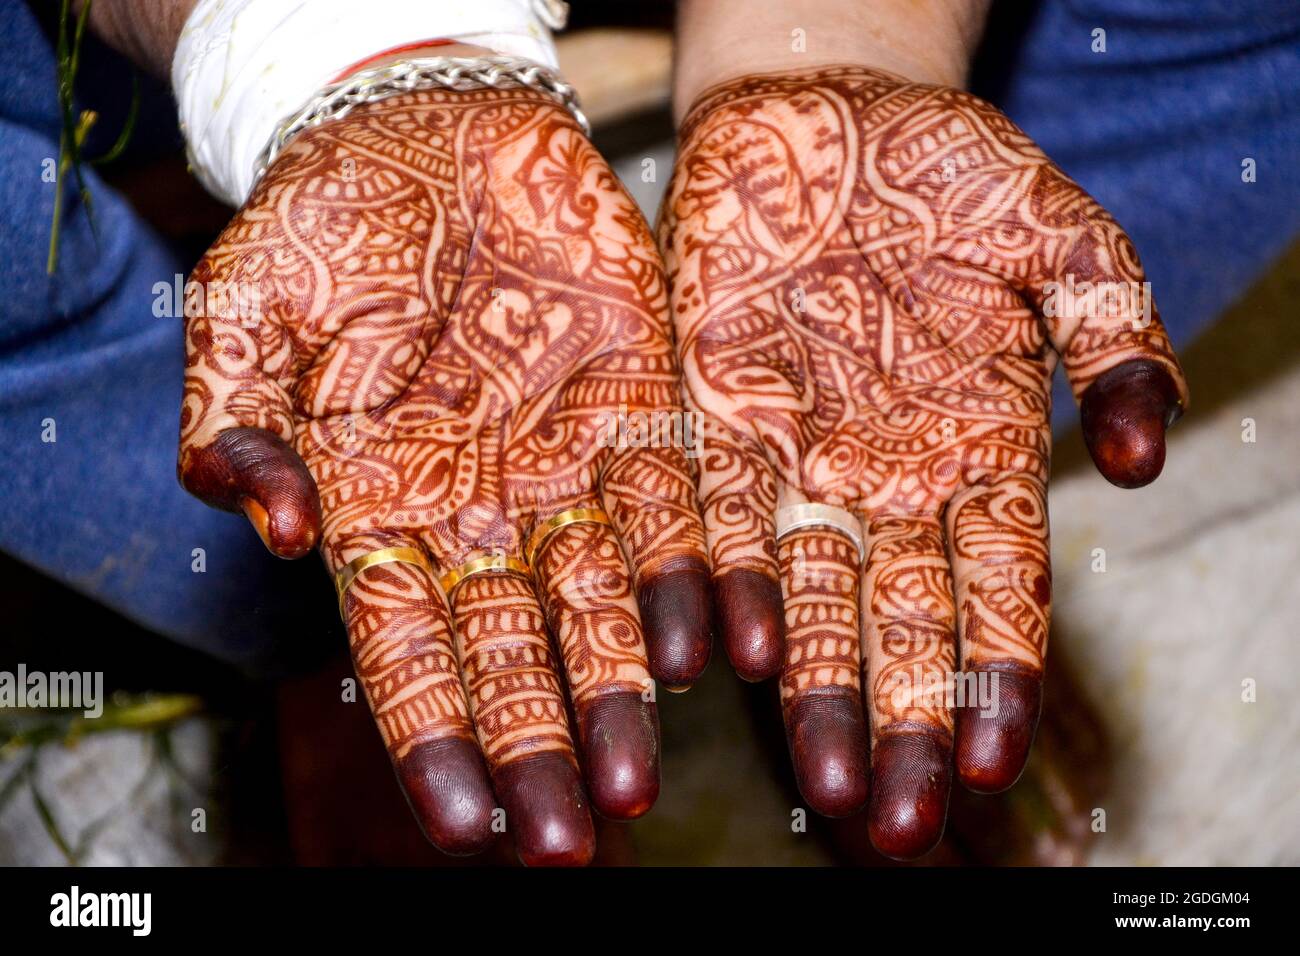 Beautiful Artwork Of Henna Mehndi On Fair Hands Of Indian Groom Henna Dye Is Applied On Man S Hand During Indian Marriage Festival Stock Photo Alamy